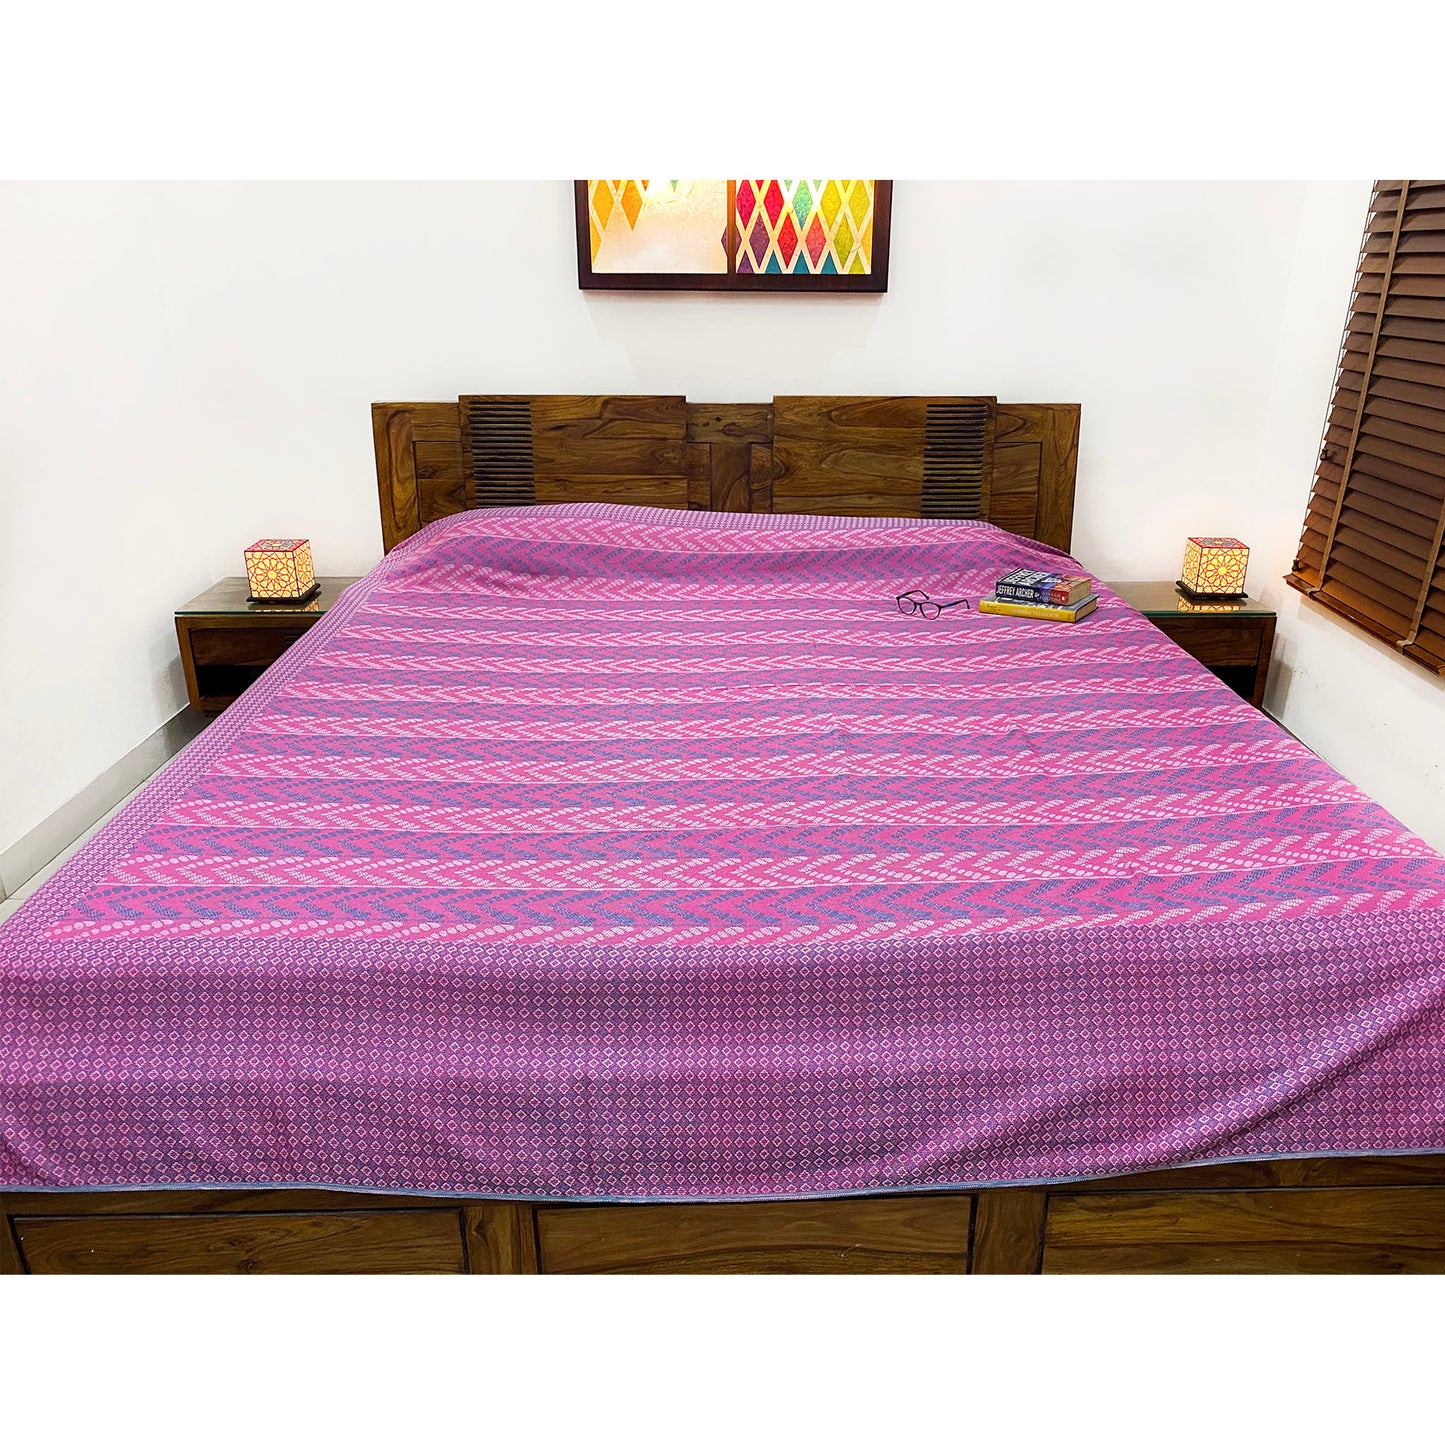 pink colour cotton bedspread for king size bed